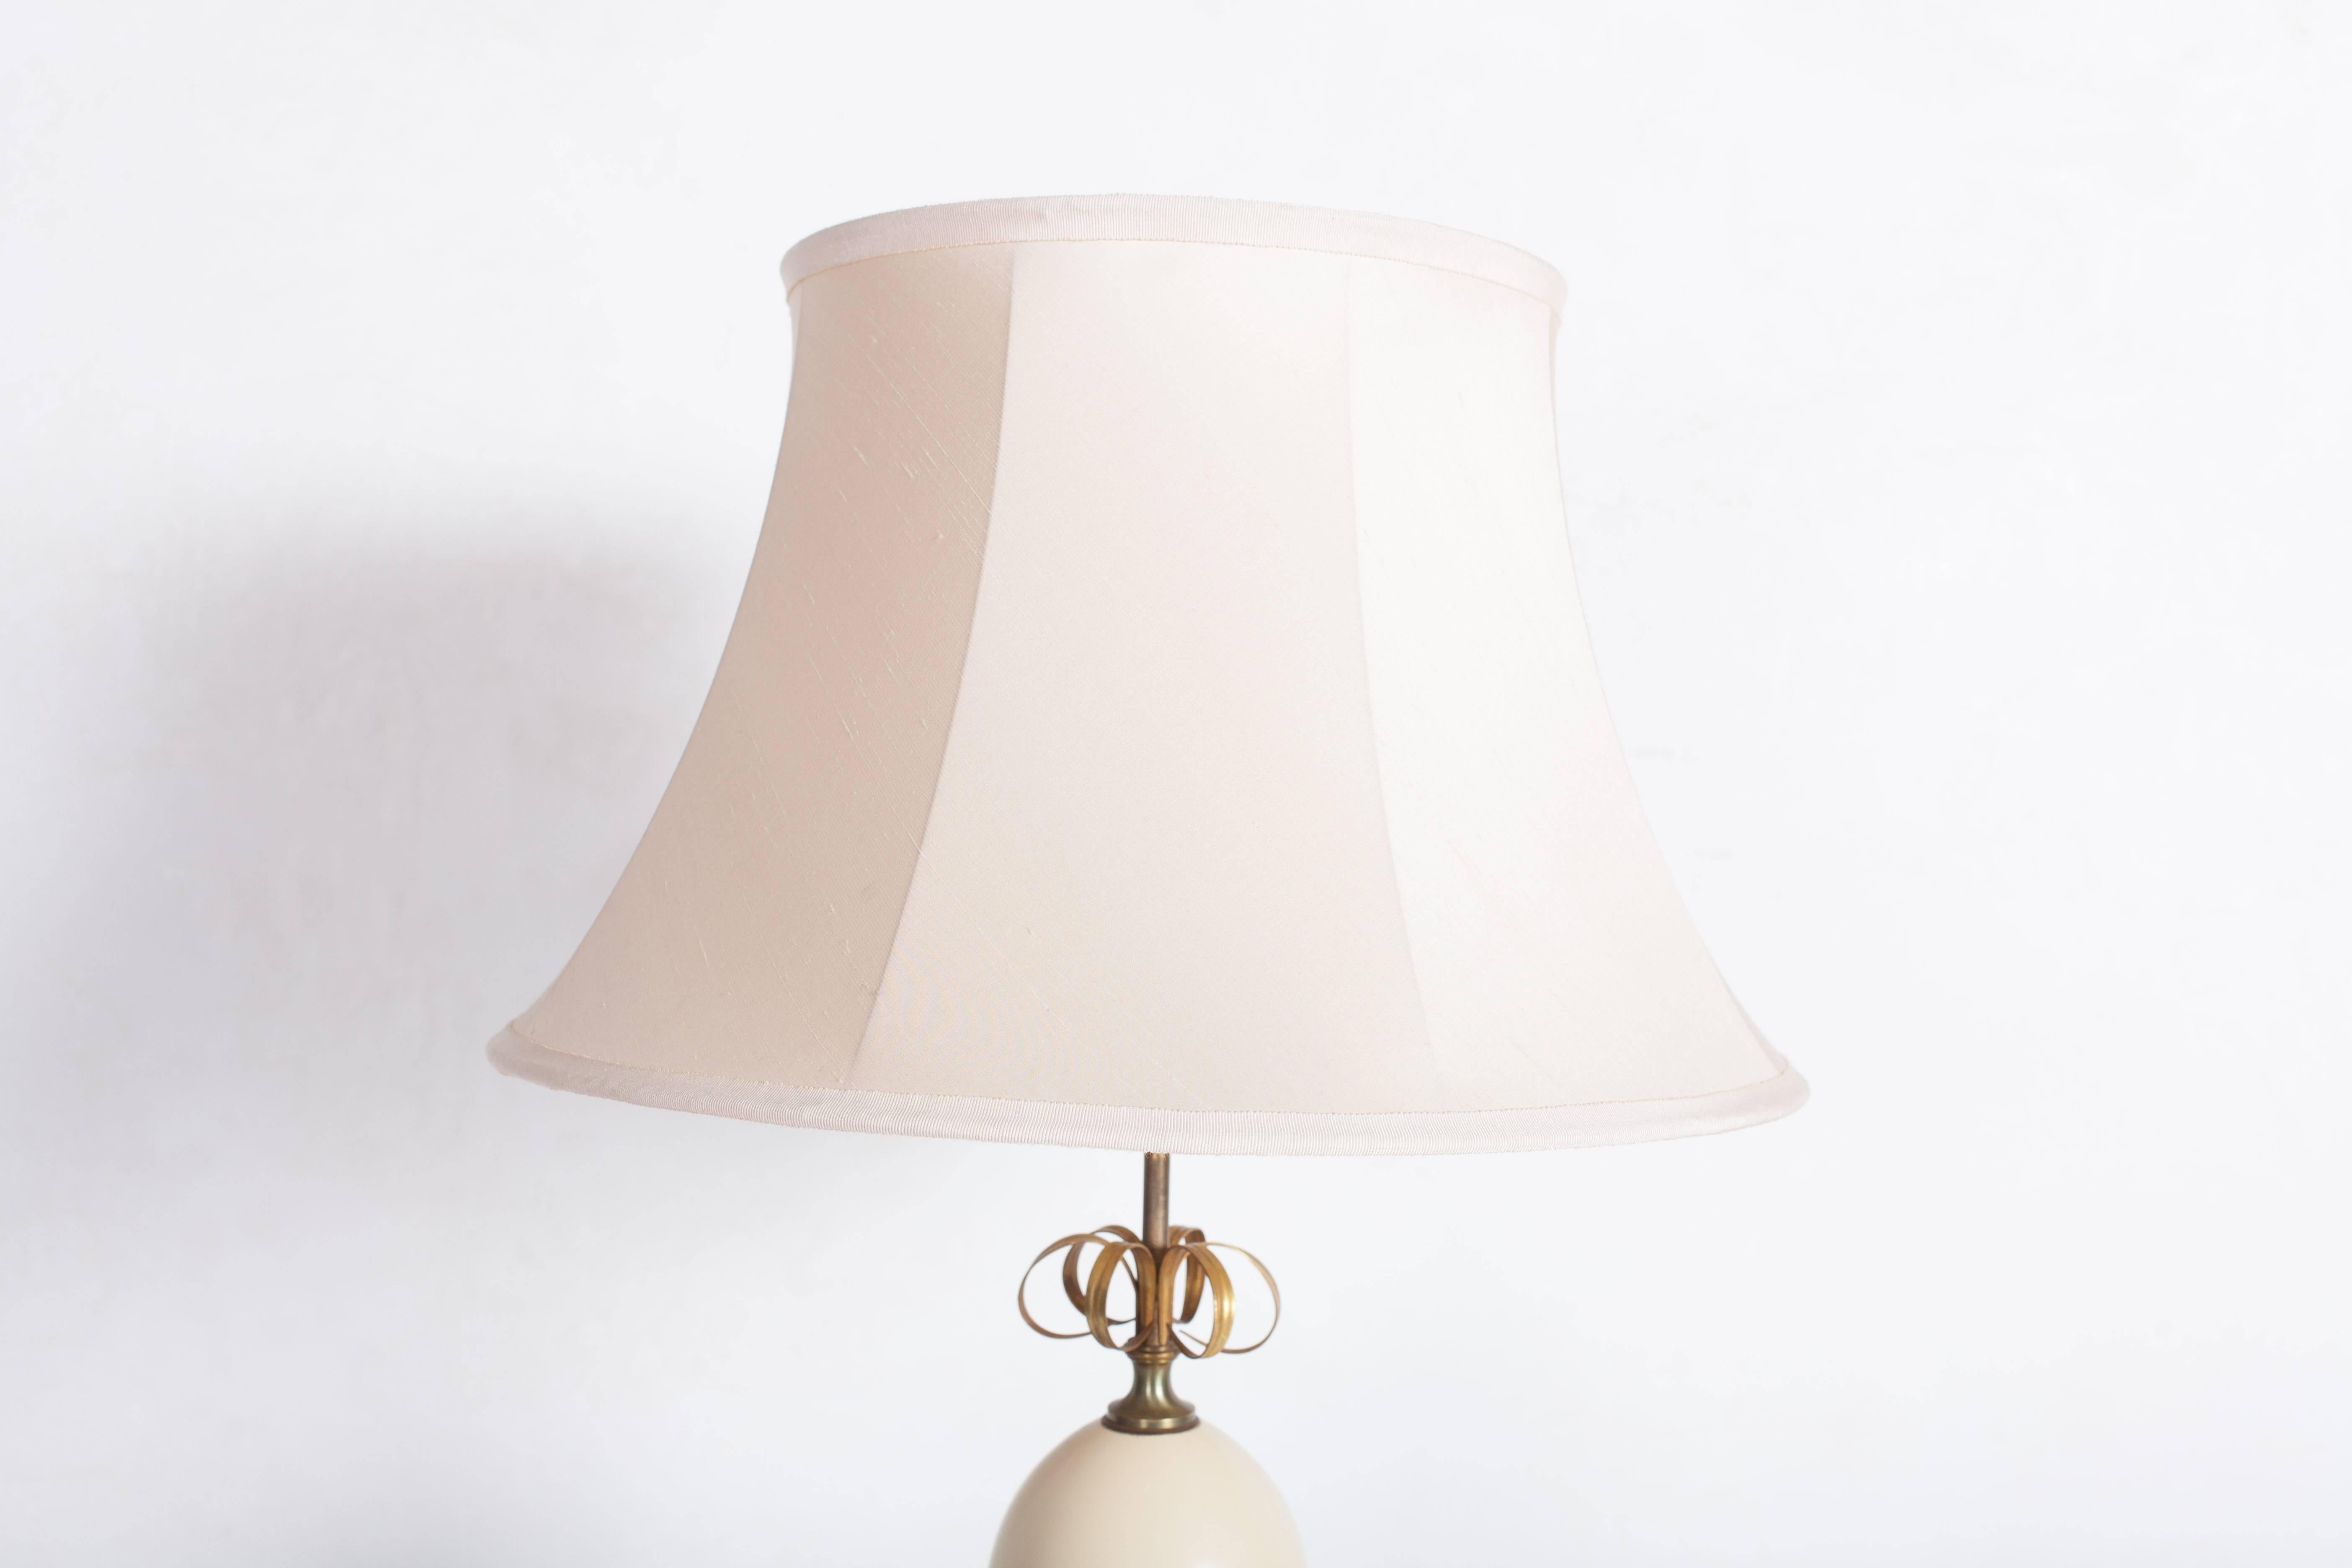 Brass Hollywood Regency Sculptural Table Lamp by Maison Jansen, 1960s For Sale